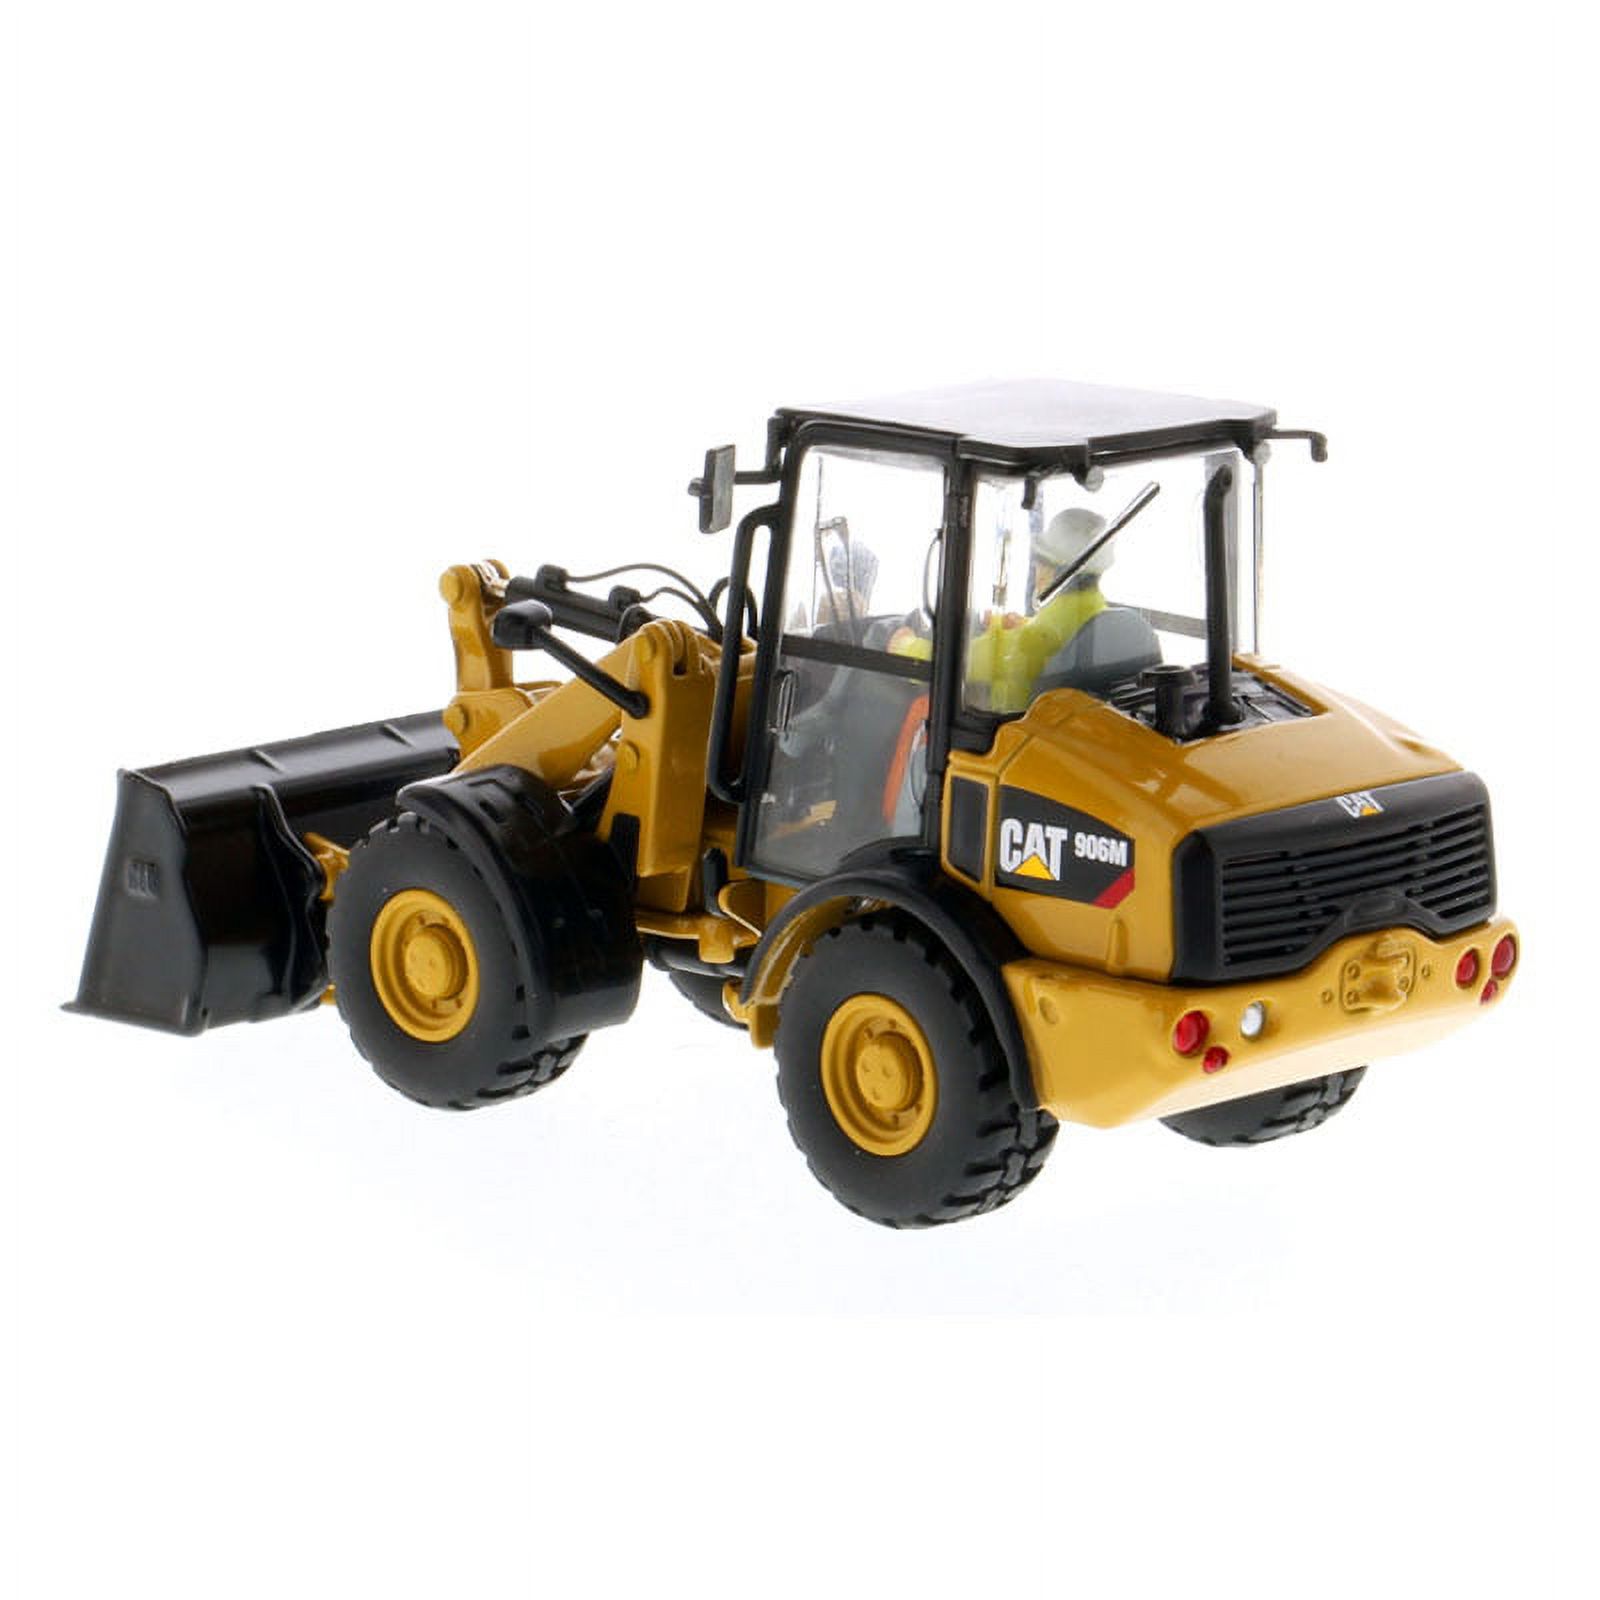 Diecast Masters 85557 1-50 CAT Caterpillar 906M Diecast Model Compact Wheel Loader with Operator - image 3 of 4